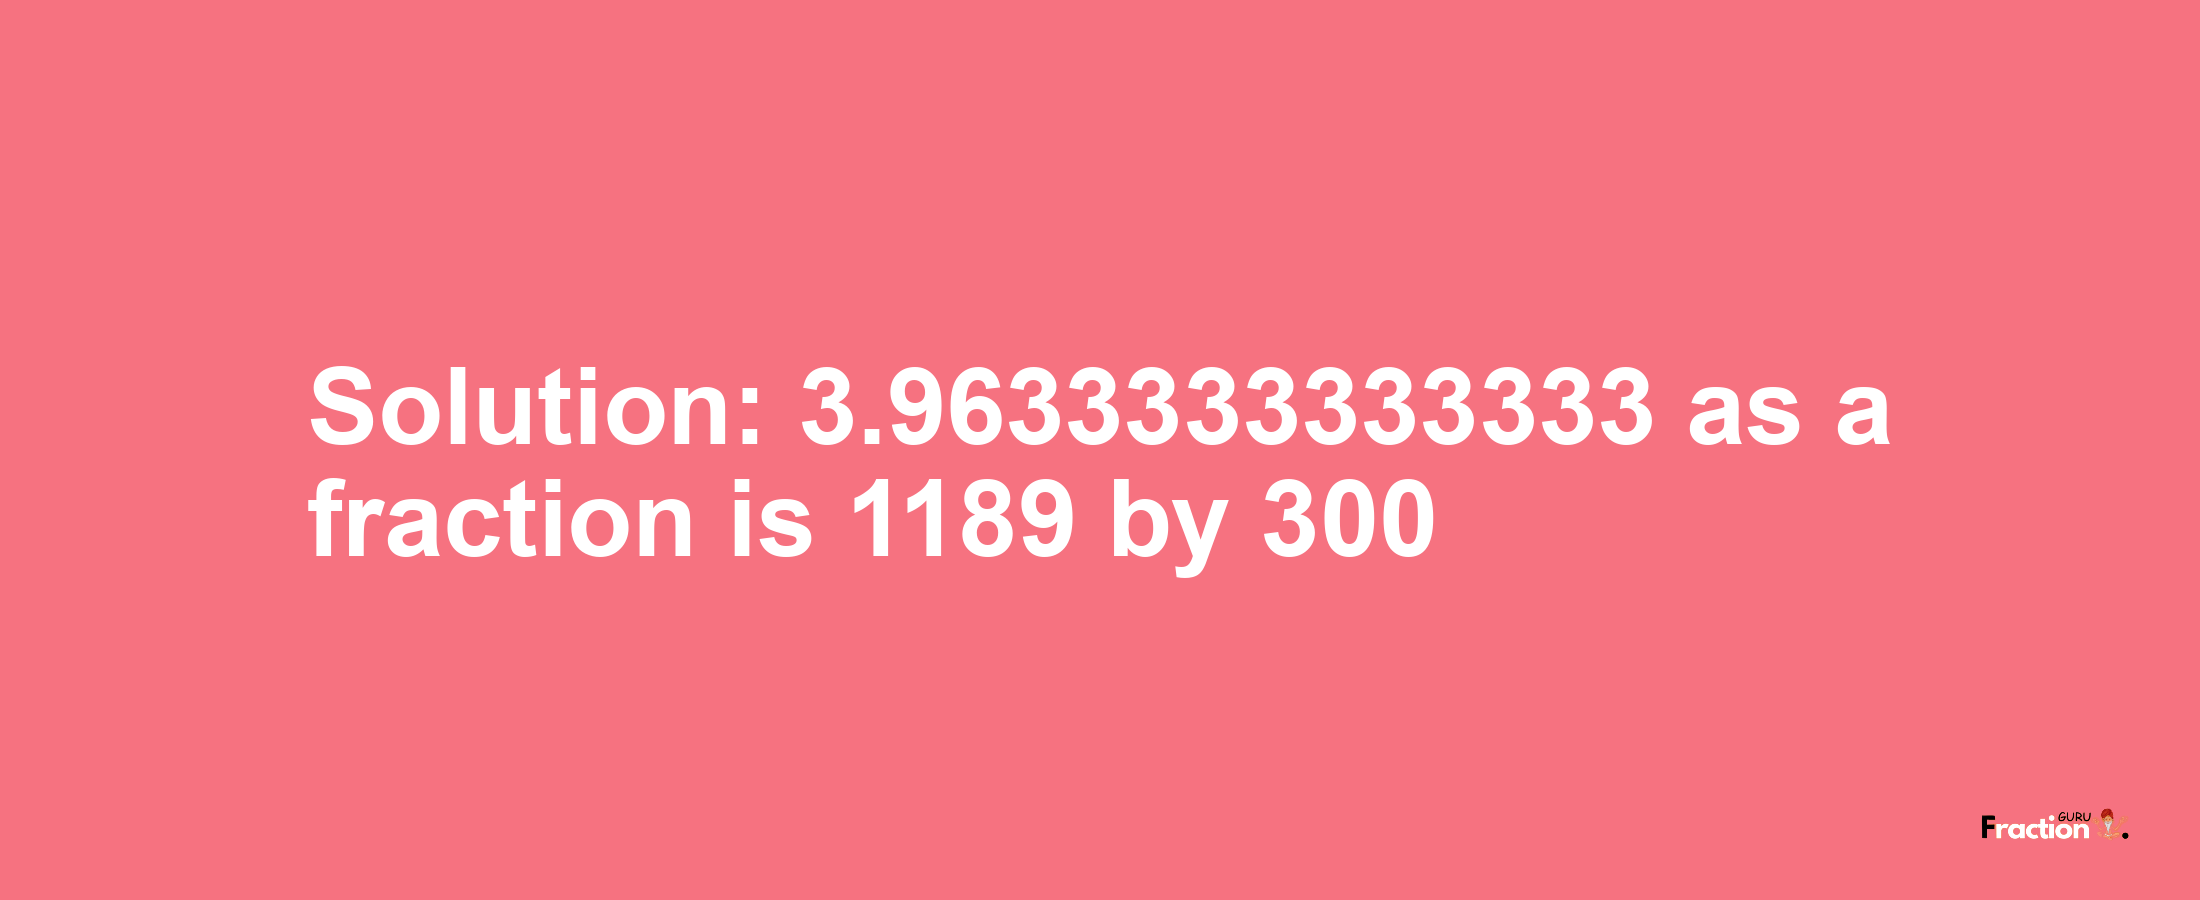 Solution:3.9633333333333 as a fraction is 1189/300